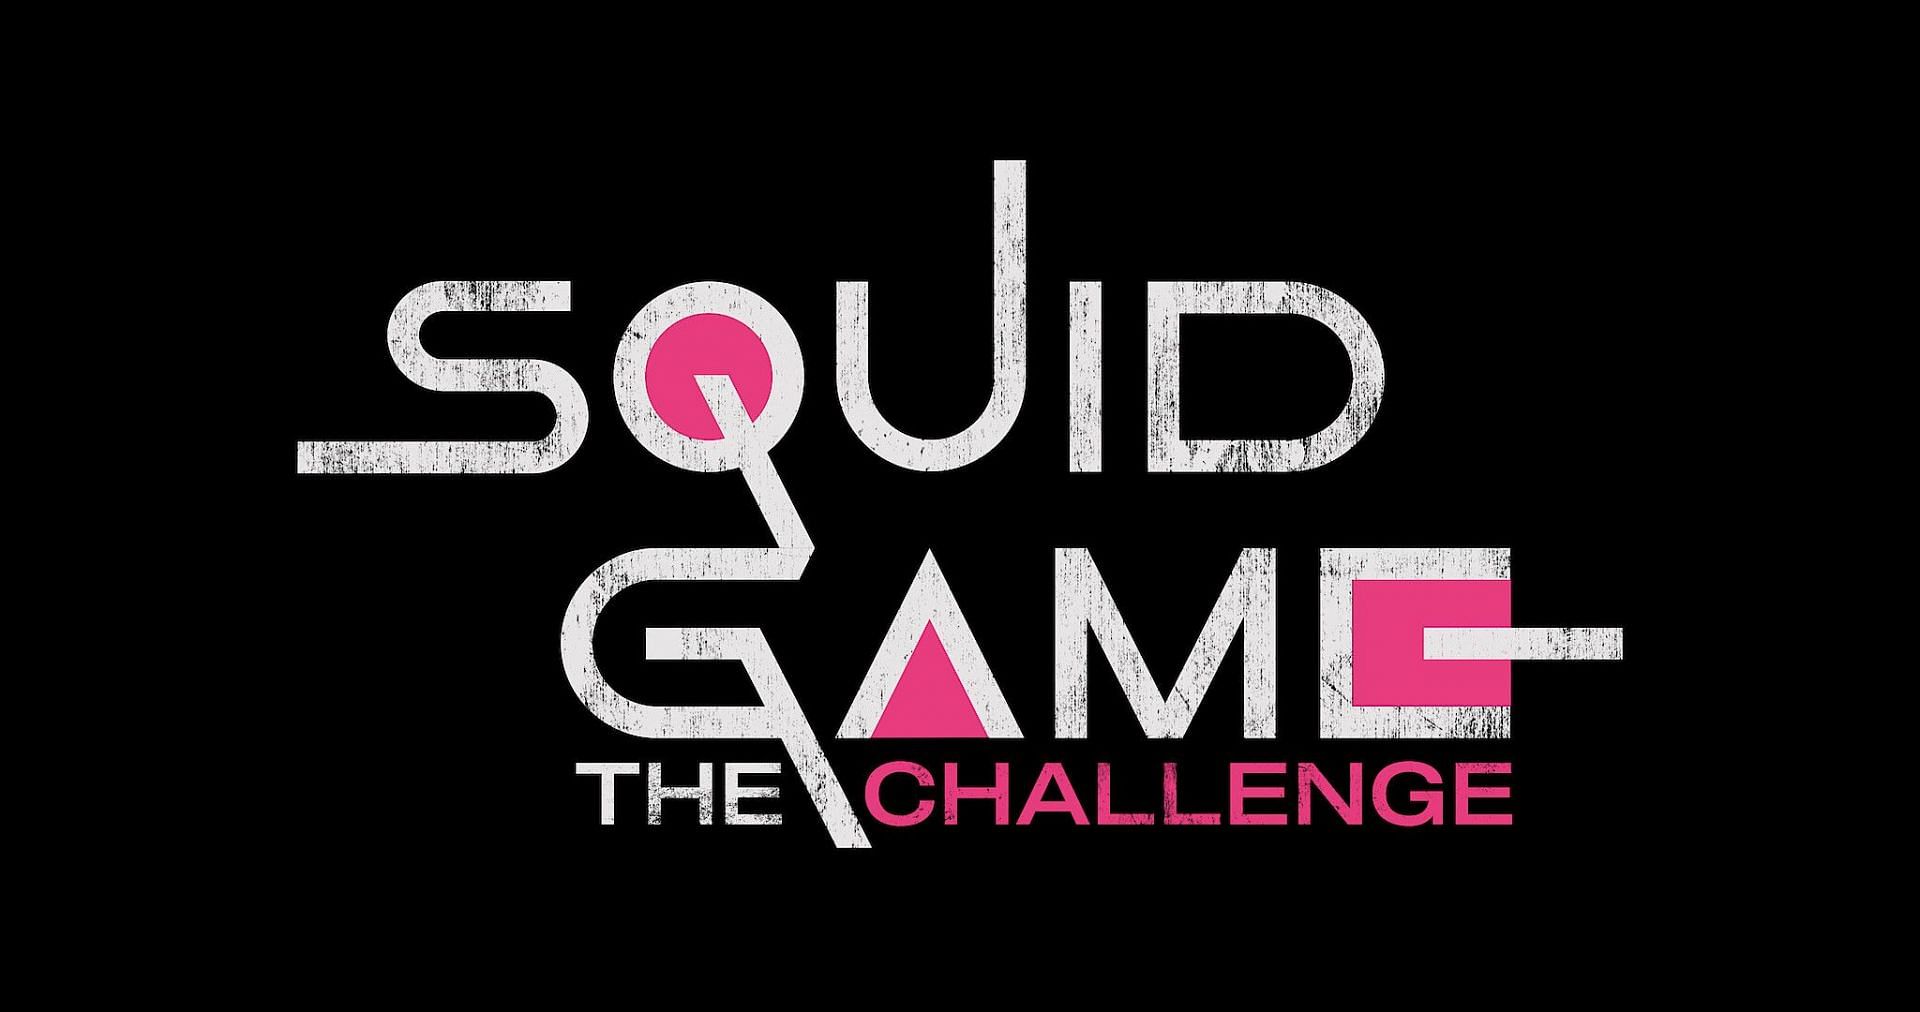 Squid Game: The Challenge has been promised a fitting end to its Season 1. (Image via Netflix)